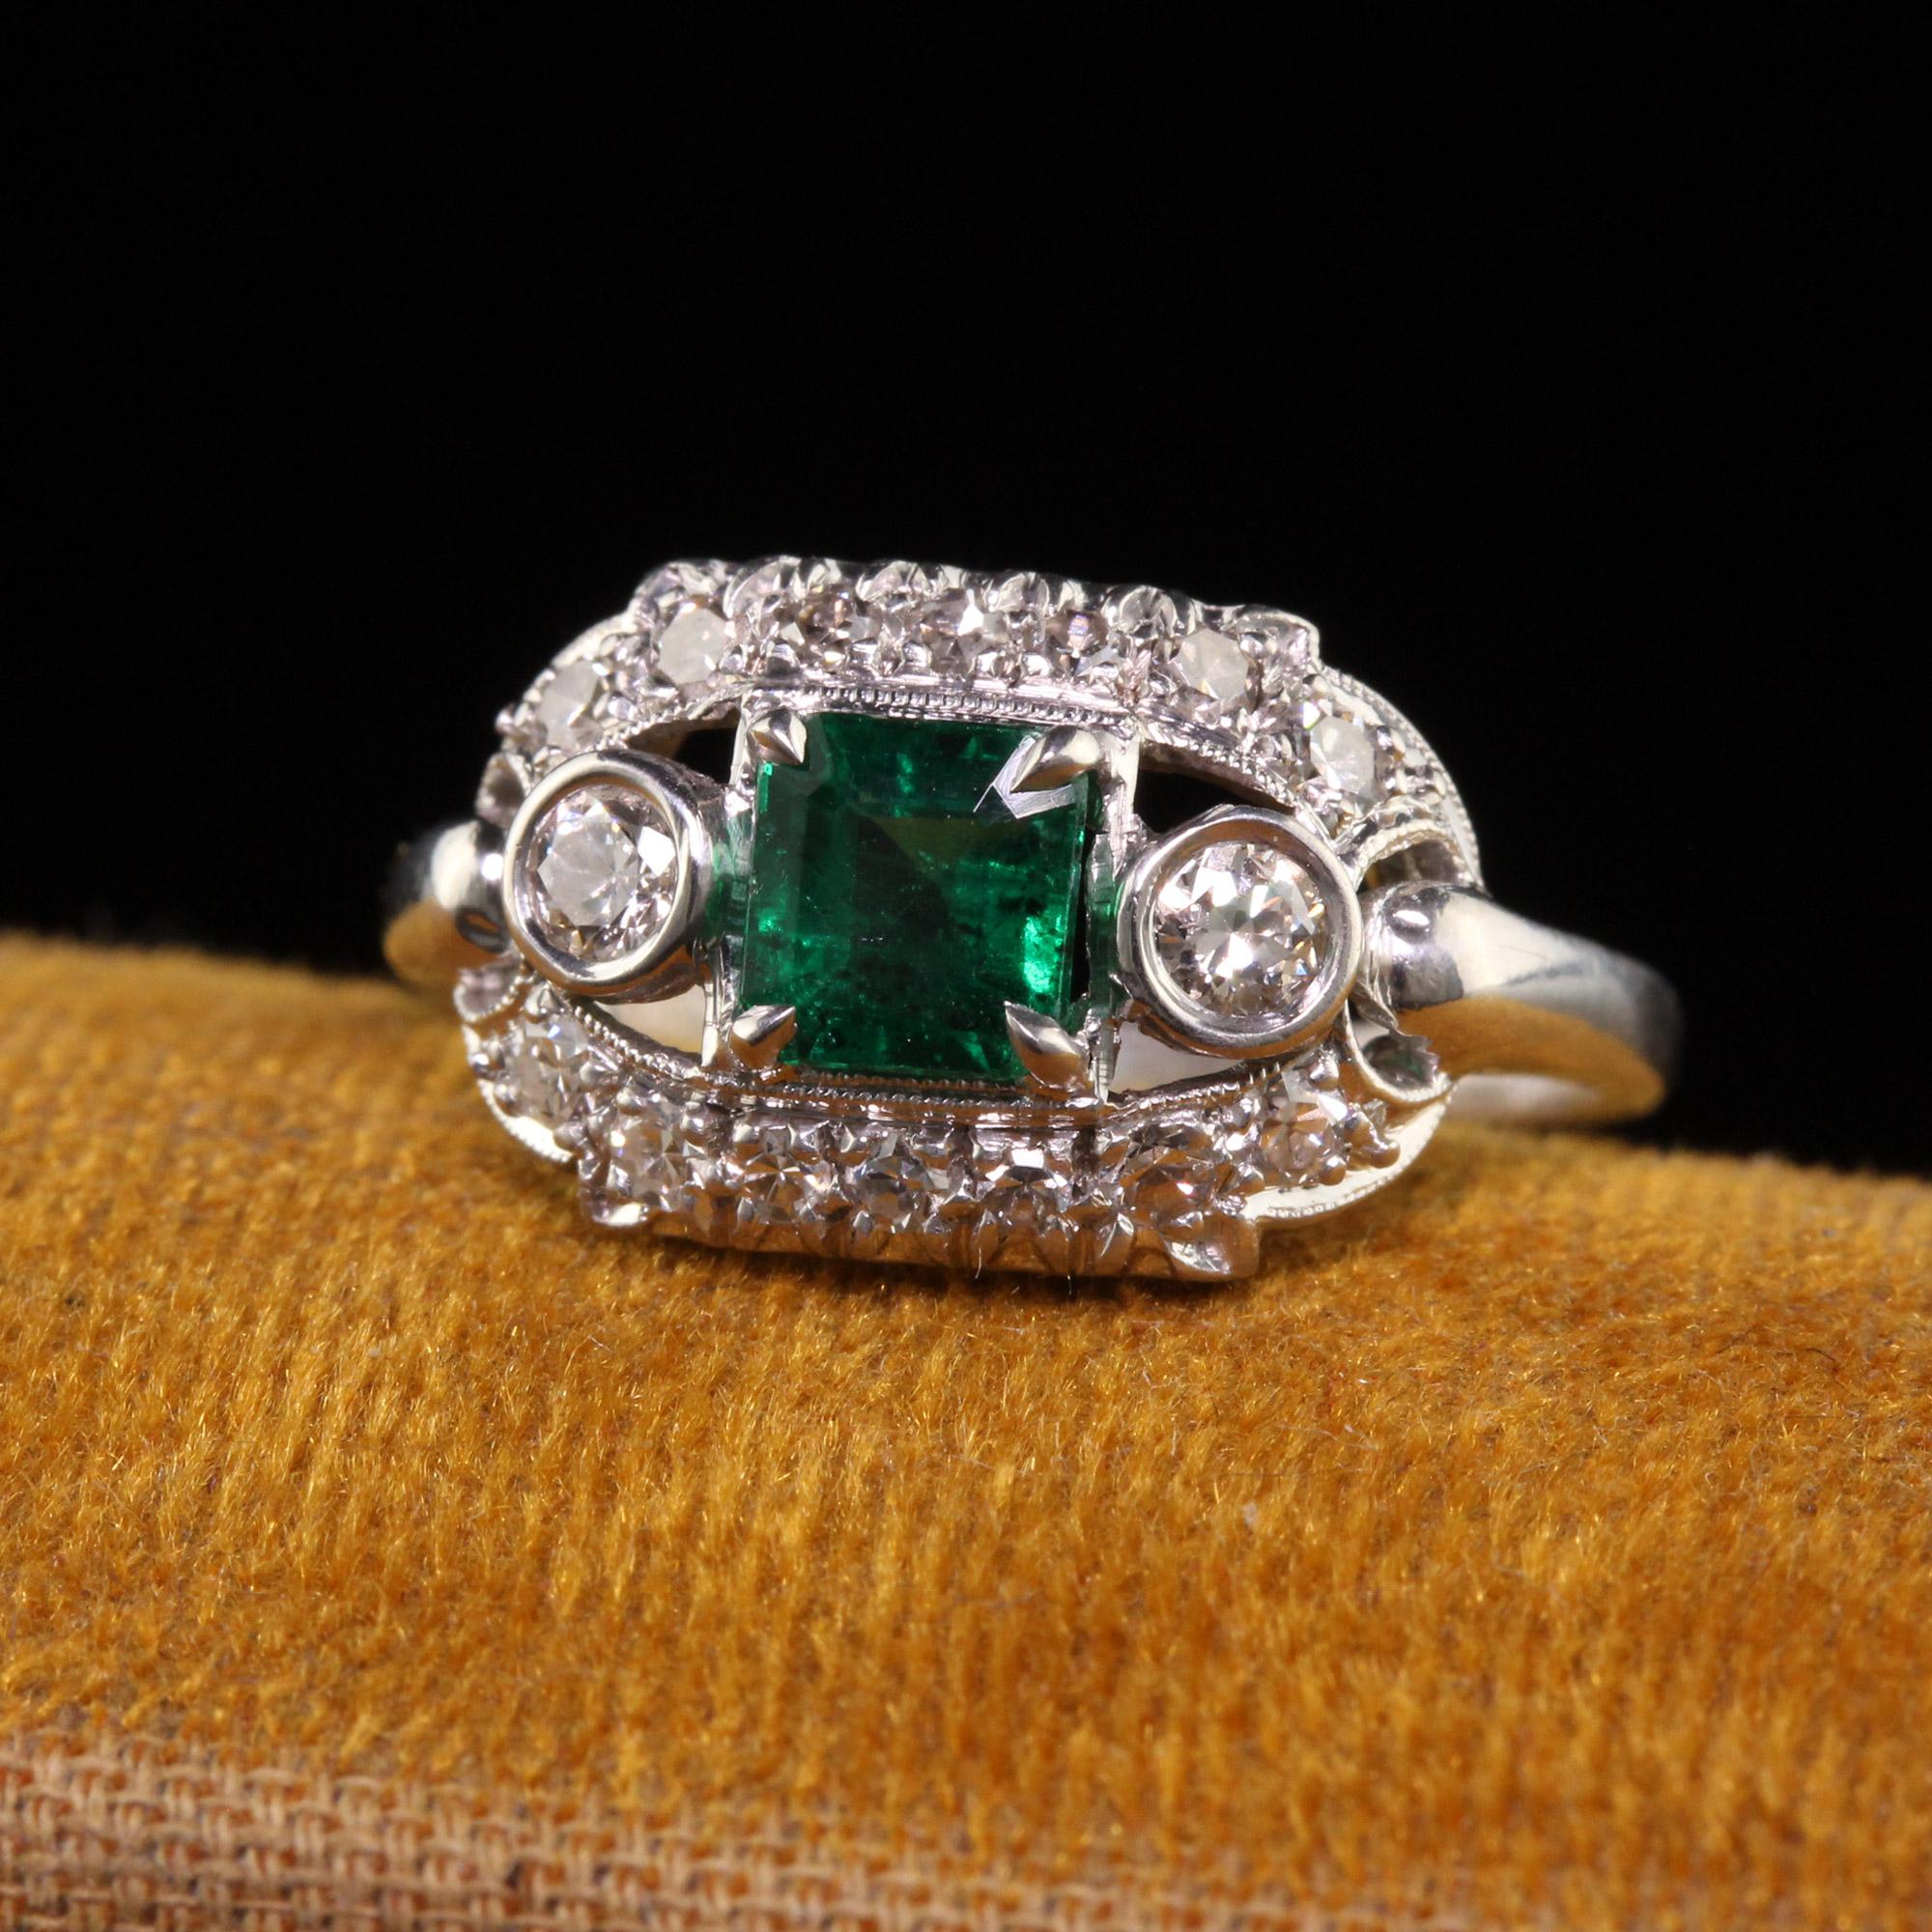 Beautiful Antique Art Deco Platinum Natural Emerald Diamond Engagement Ring. This beautiful engagement ring is crafted in platinum. The center holds a natural emerald and is set with beautiful diamonds around it in a gorgeous Art Deco